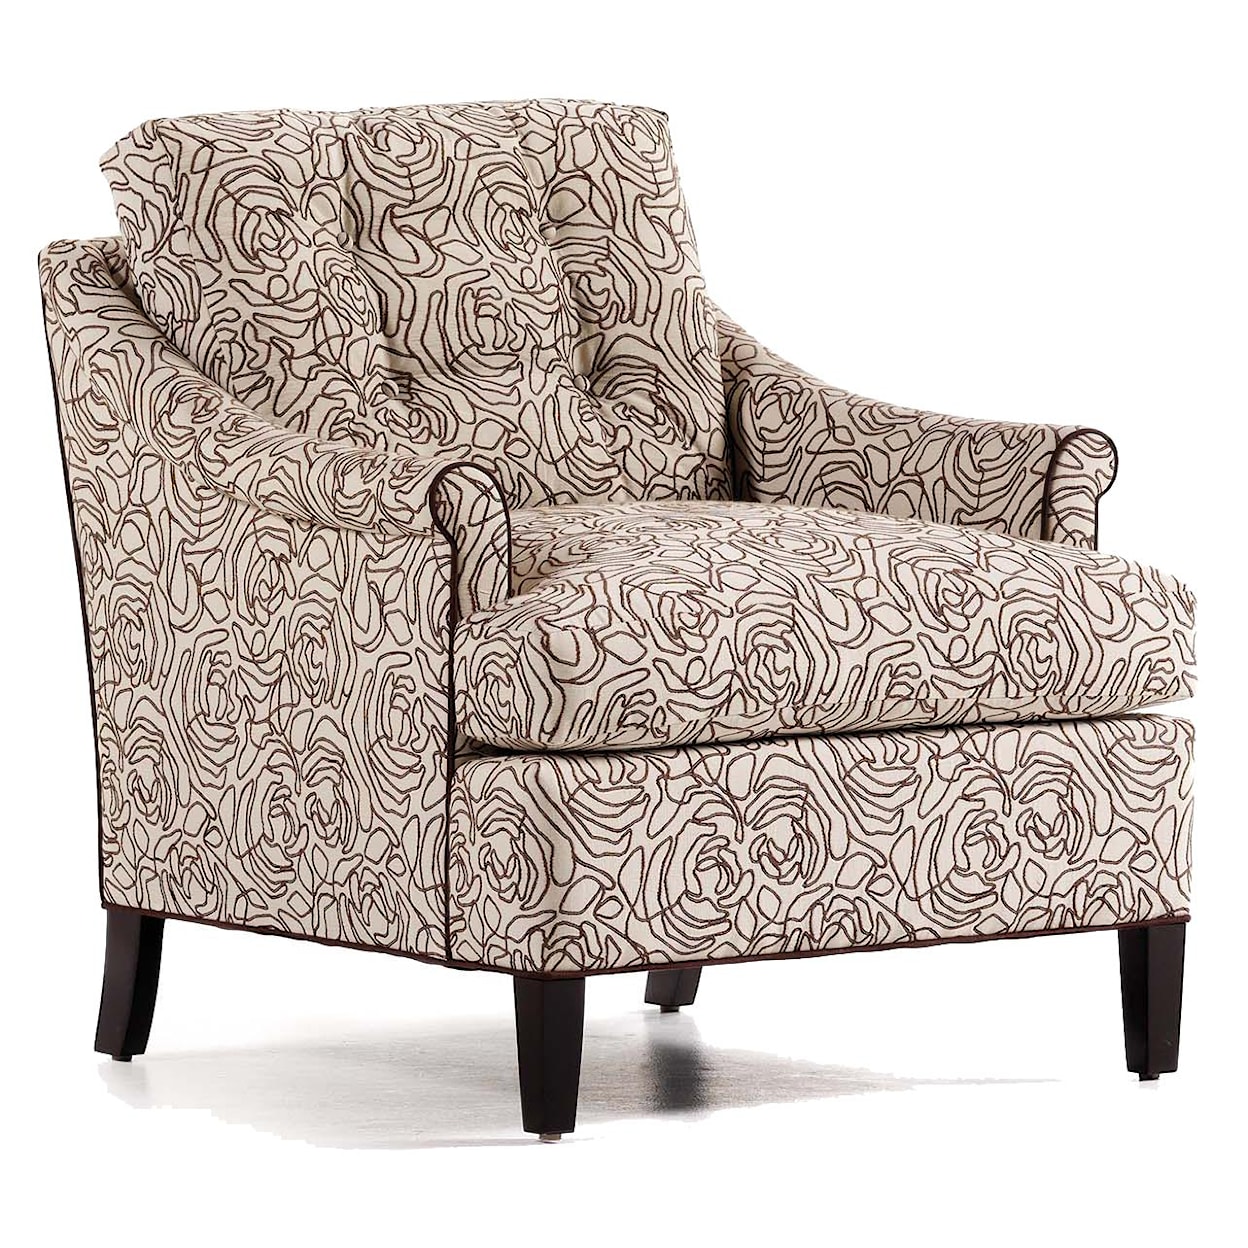 Jessica Charles Fine Upholstered Accents Mimi Chair